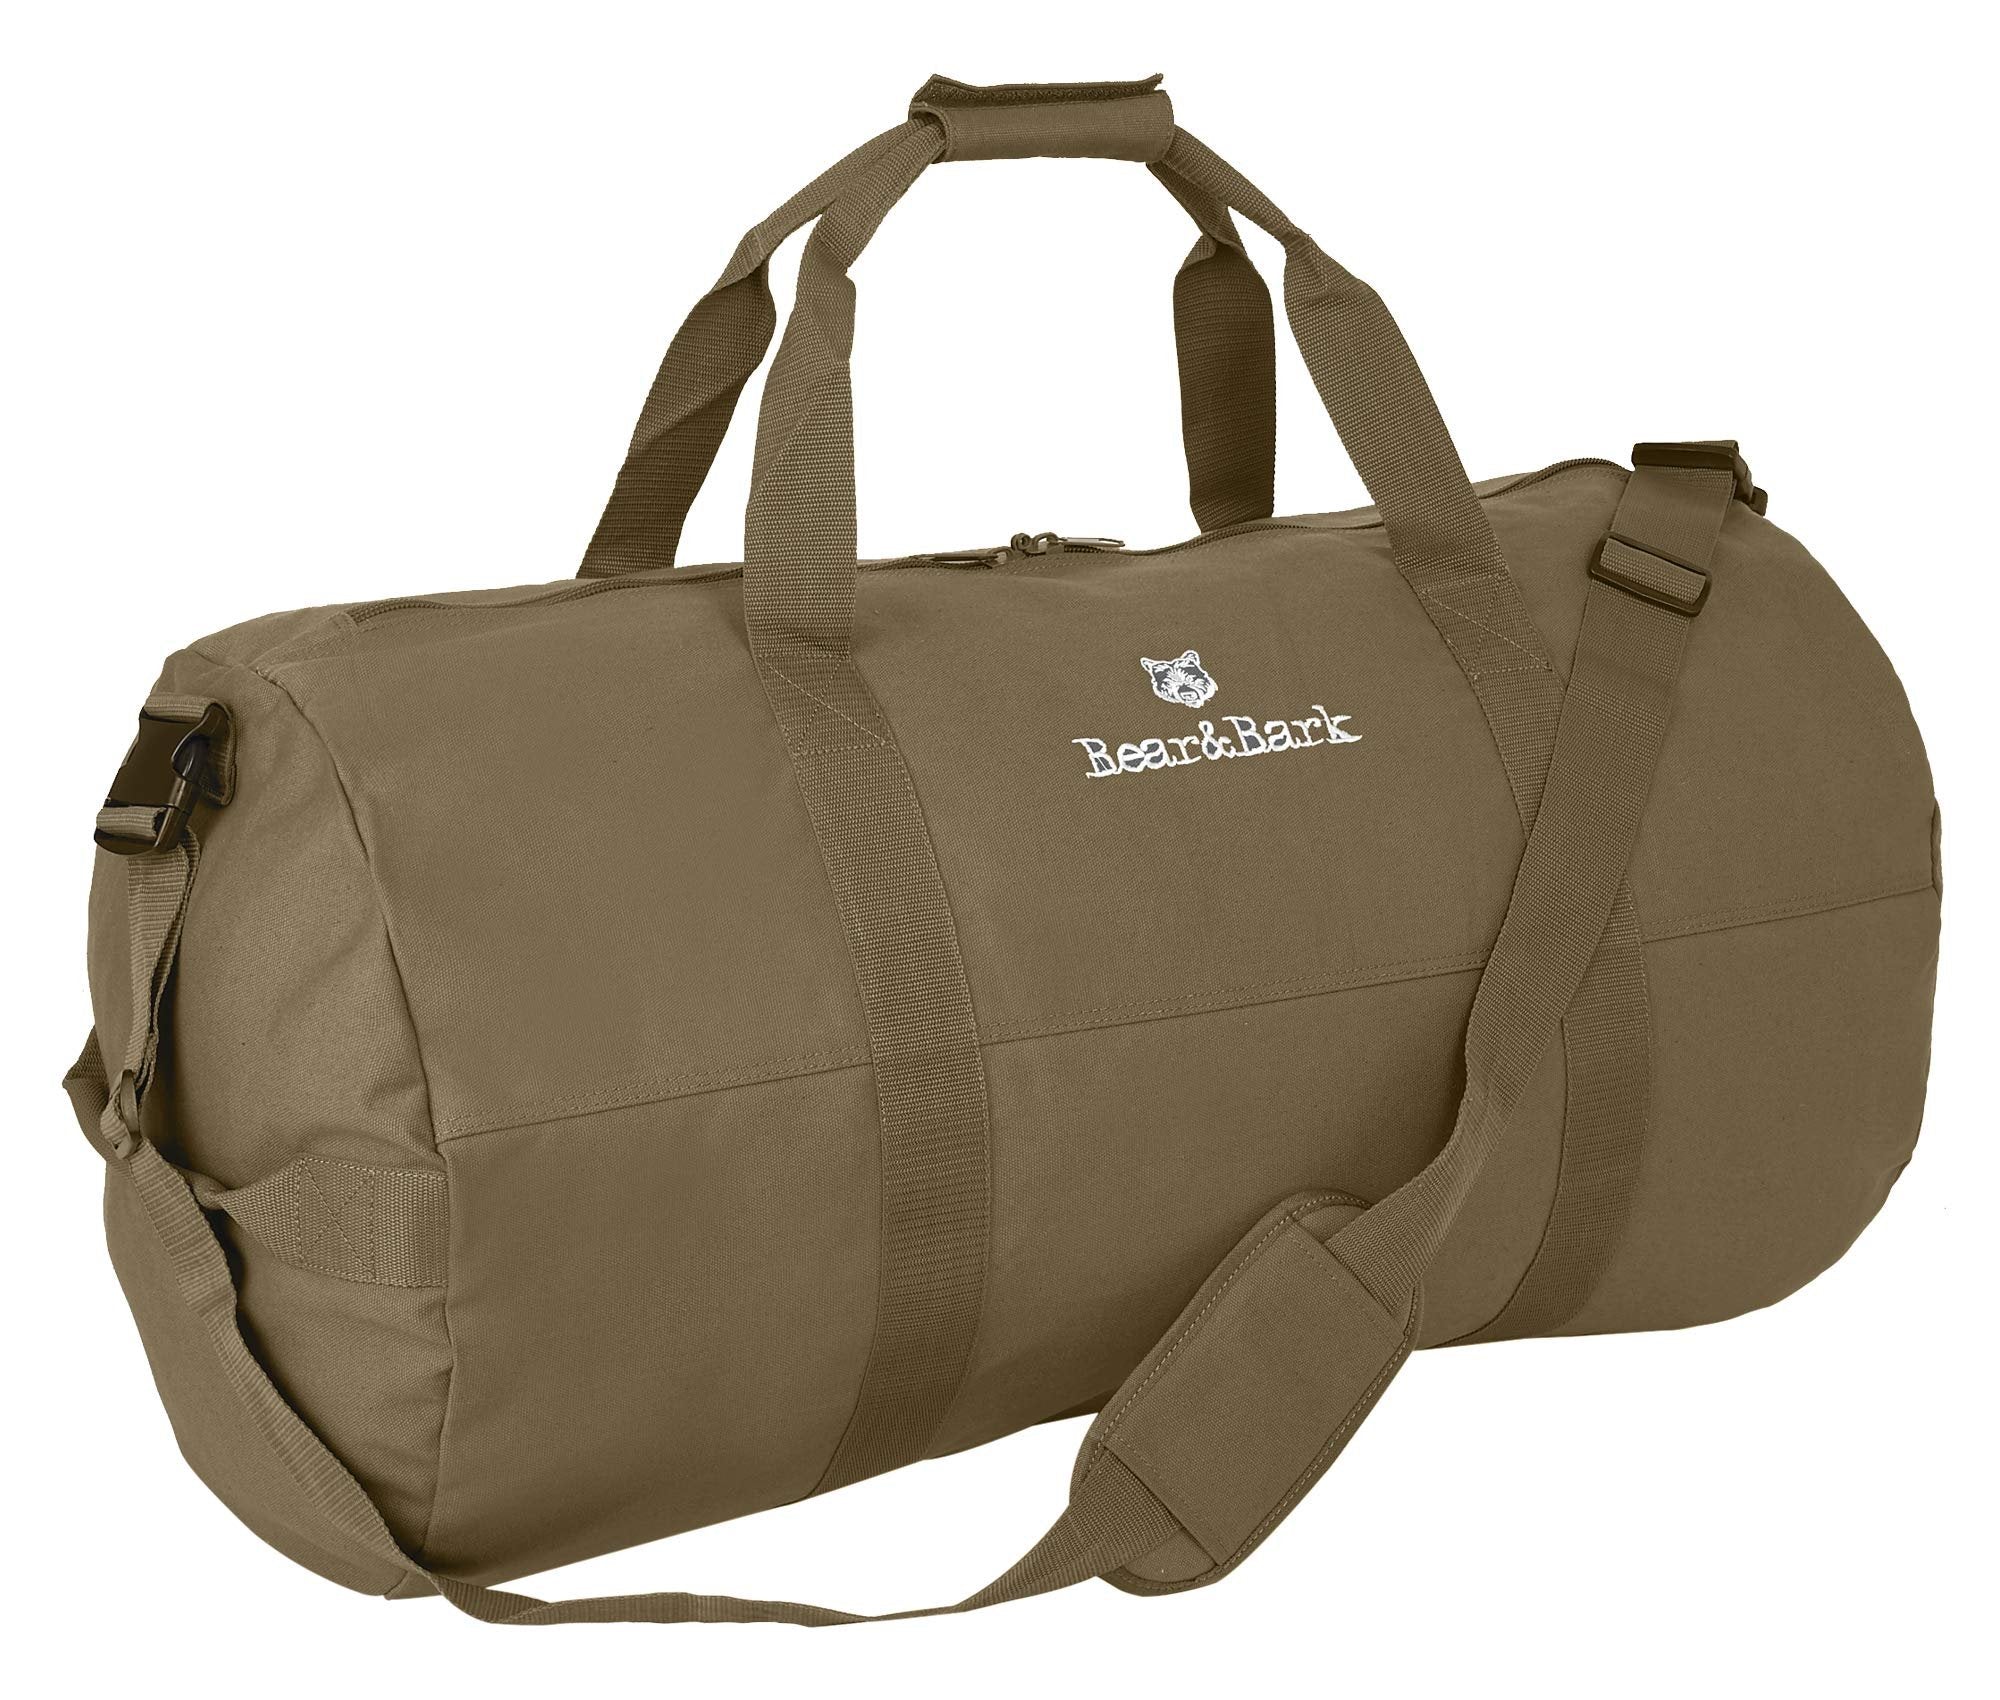 Very Large Duffle Bag - Military Green 38”x20” - 195.6L - Canvas Army Cargo Style Duffel Tote for Men and Women- College Student, Gym, Dorm, Backpacking, Sports,Travel Luggage and Storage Shoulder Bag